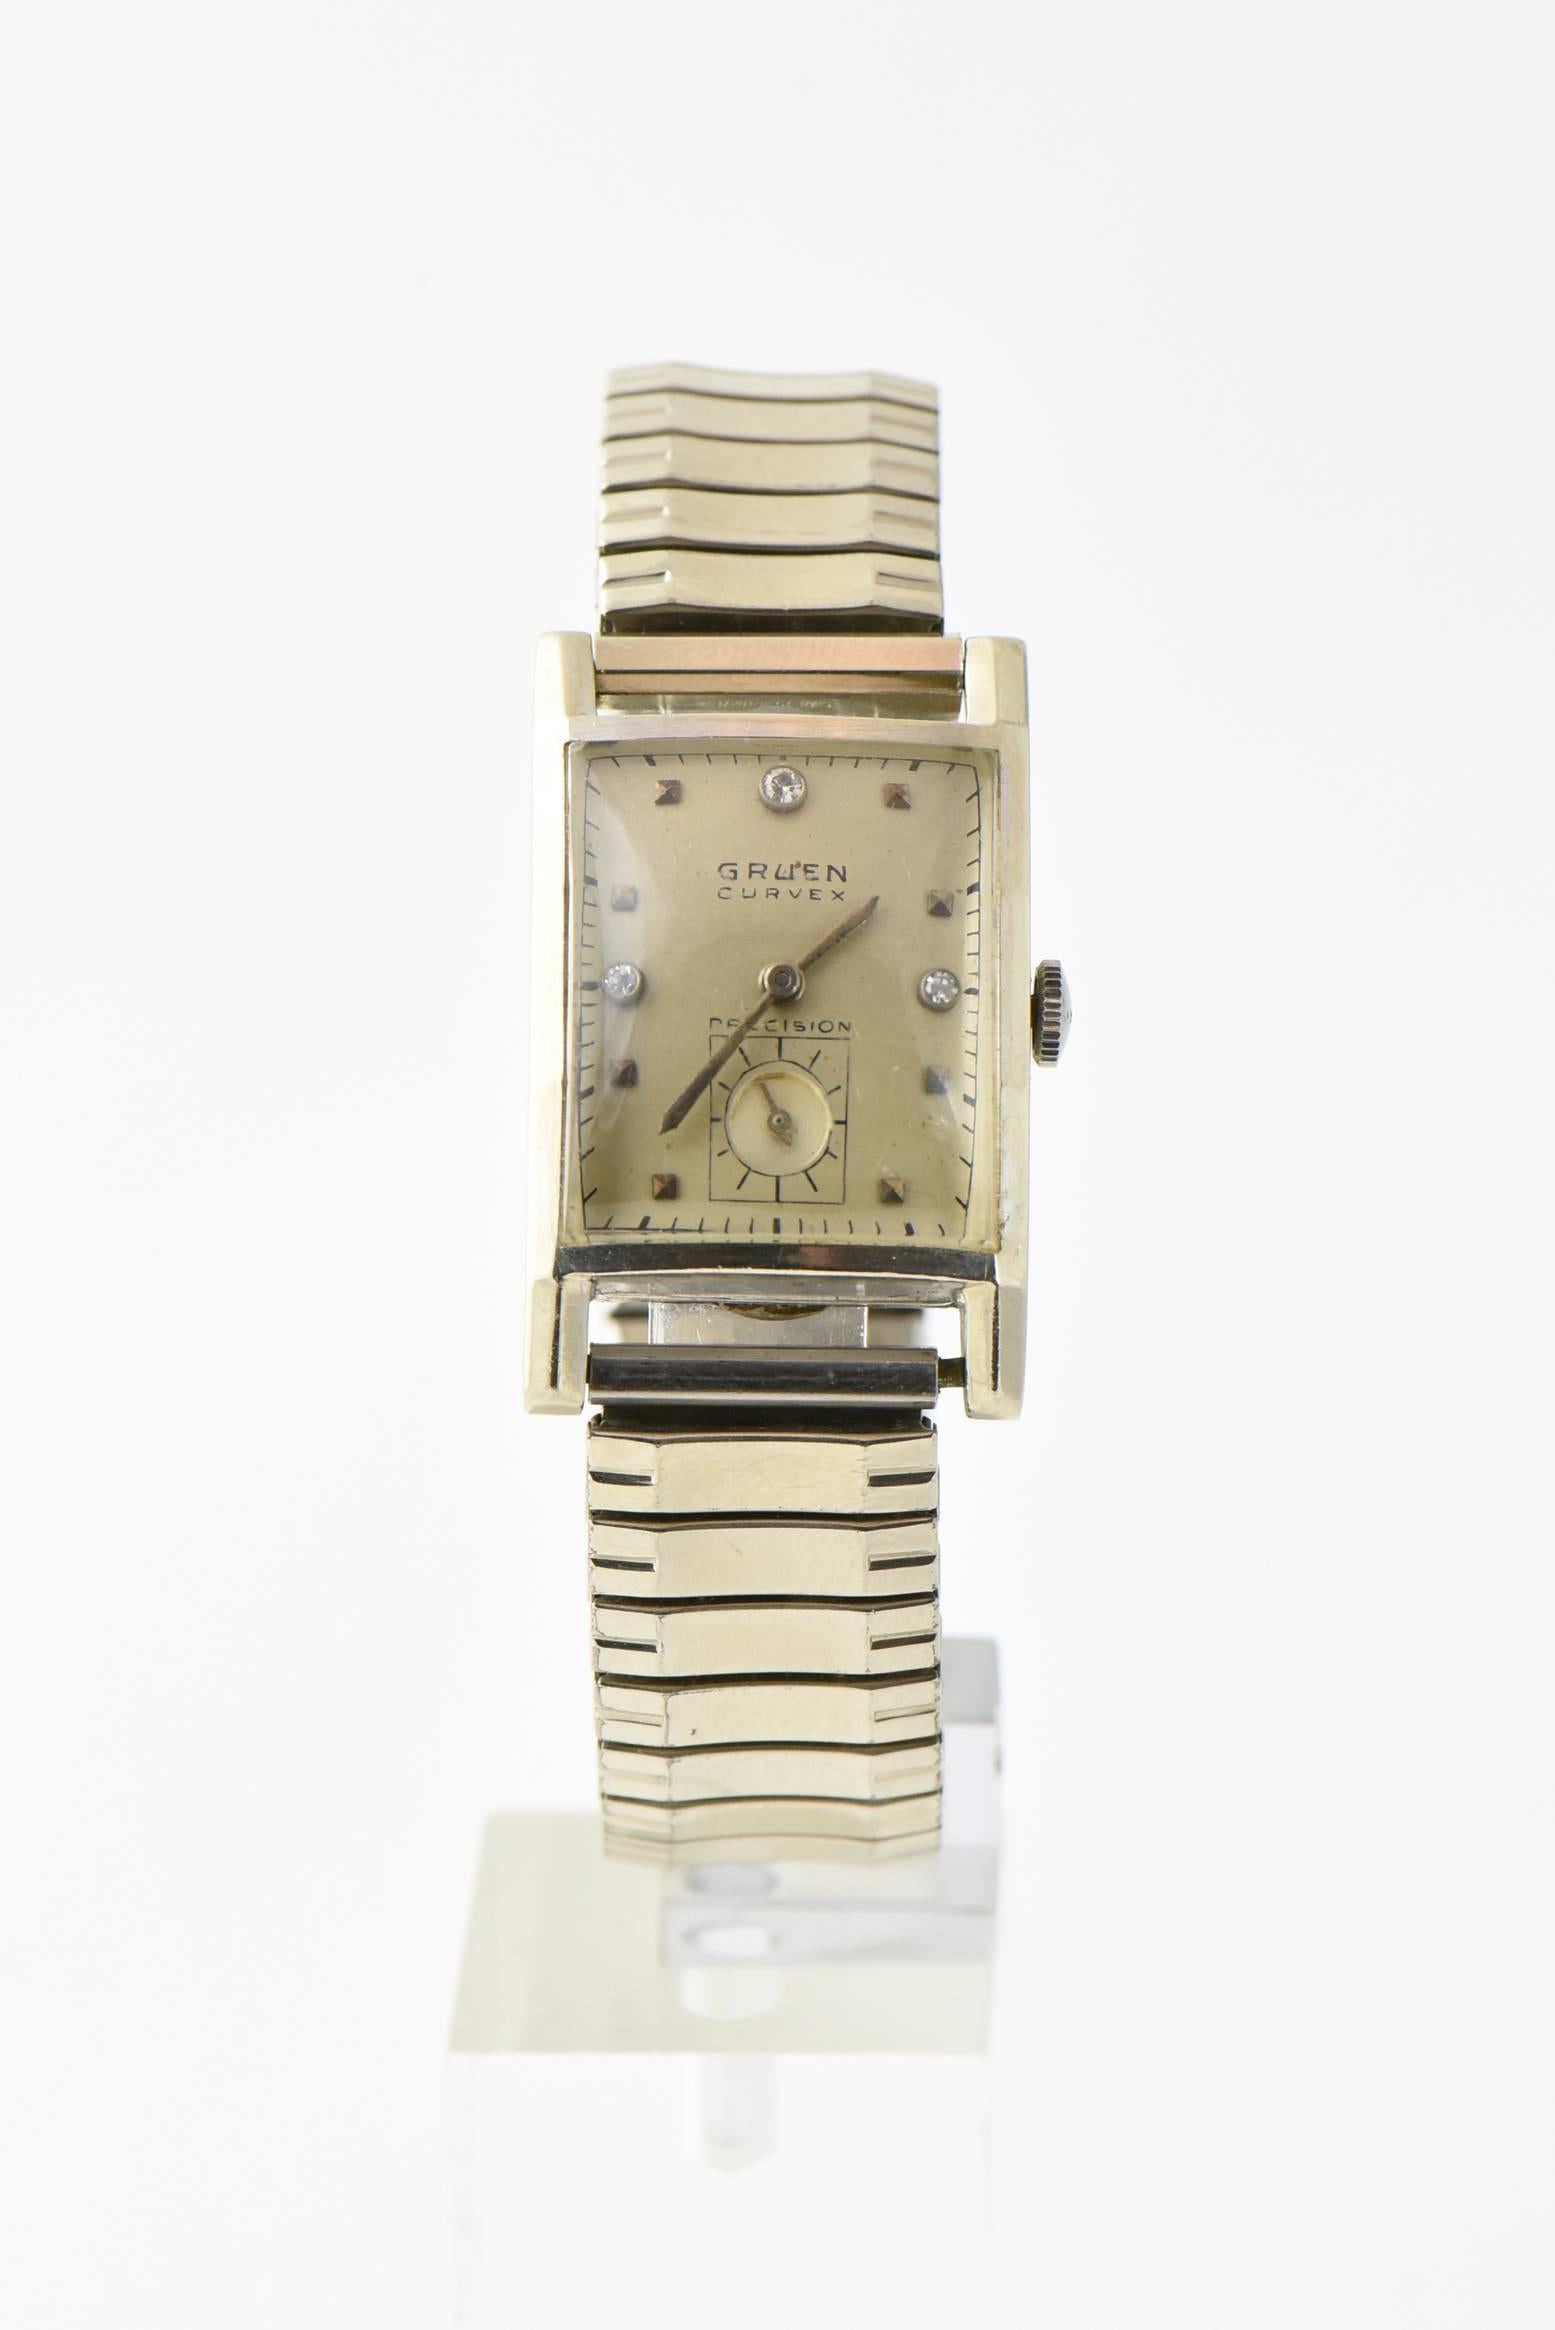 Late-1940s Gruen Curvex Precision 14K white gold men's watch on a flexible steel Speidel band. Three diamonds on the watch face. Mechanical - wind movement. The back of the case is marked: 14K WBO GOLD. Serial number: 344420. Age wear.